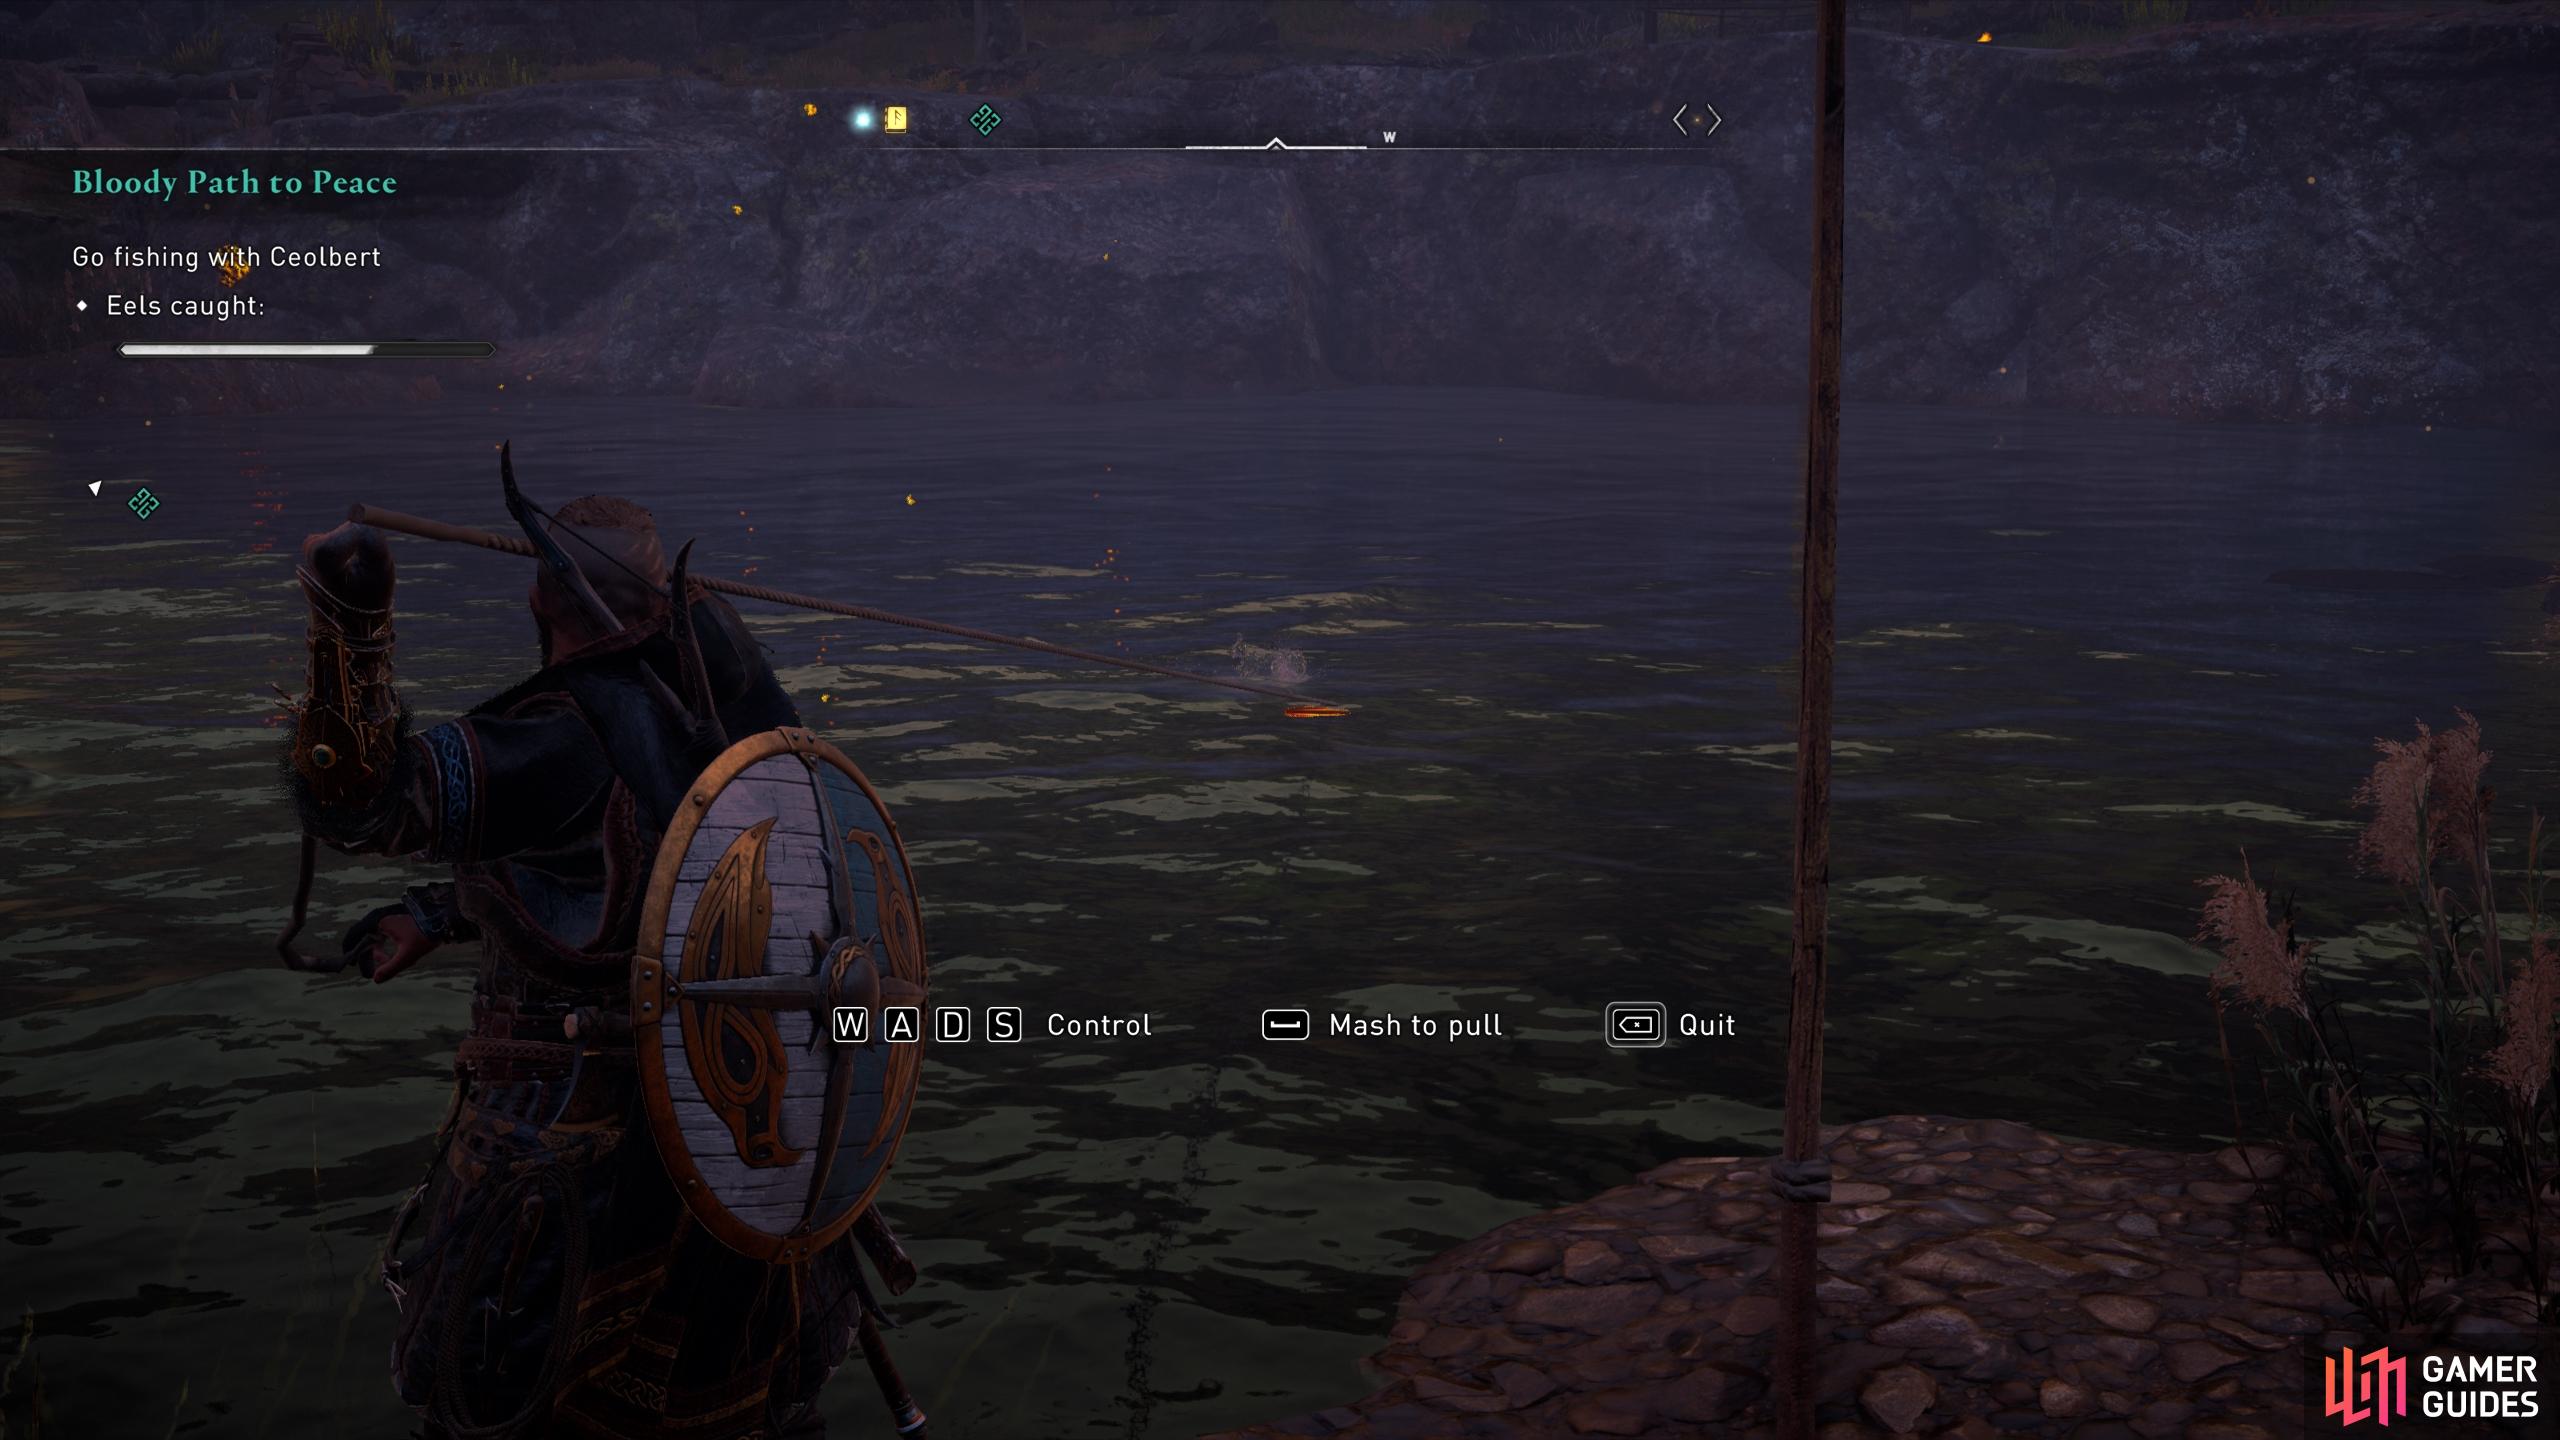 You'll need to catch at least 3 eel from the pond, or kill and loot them with your bow or melee weapon.